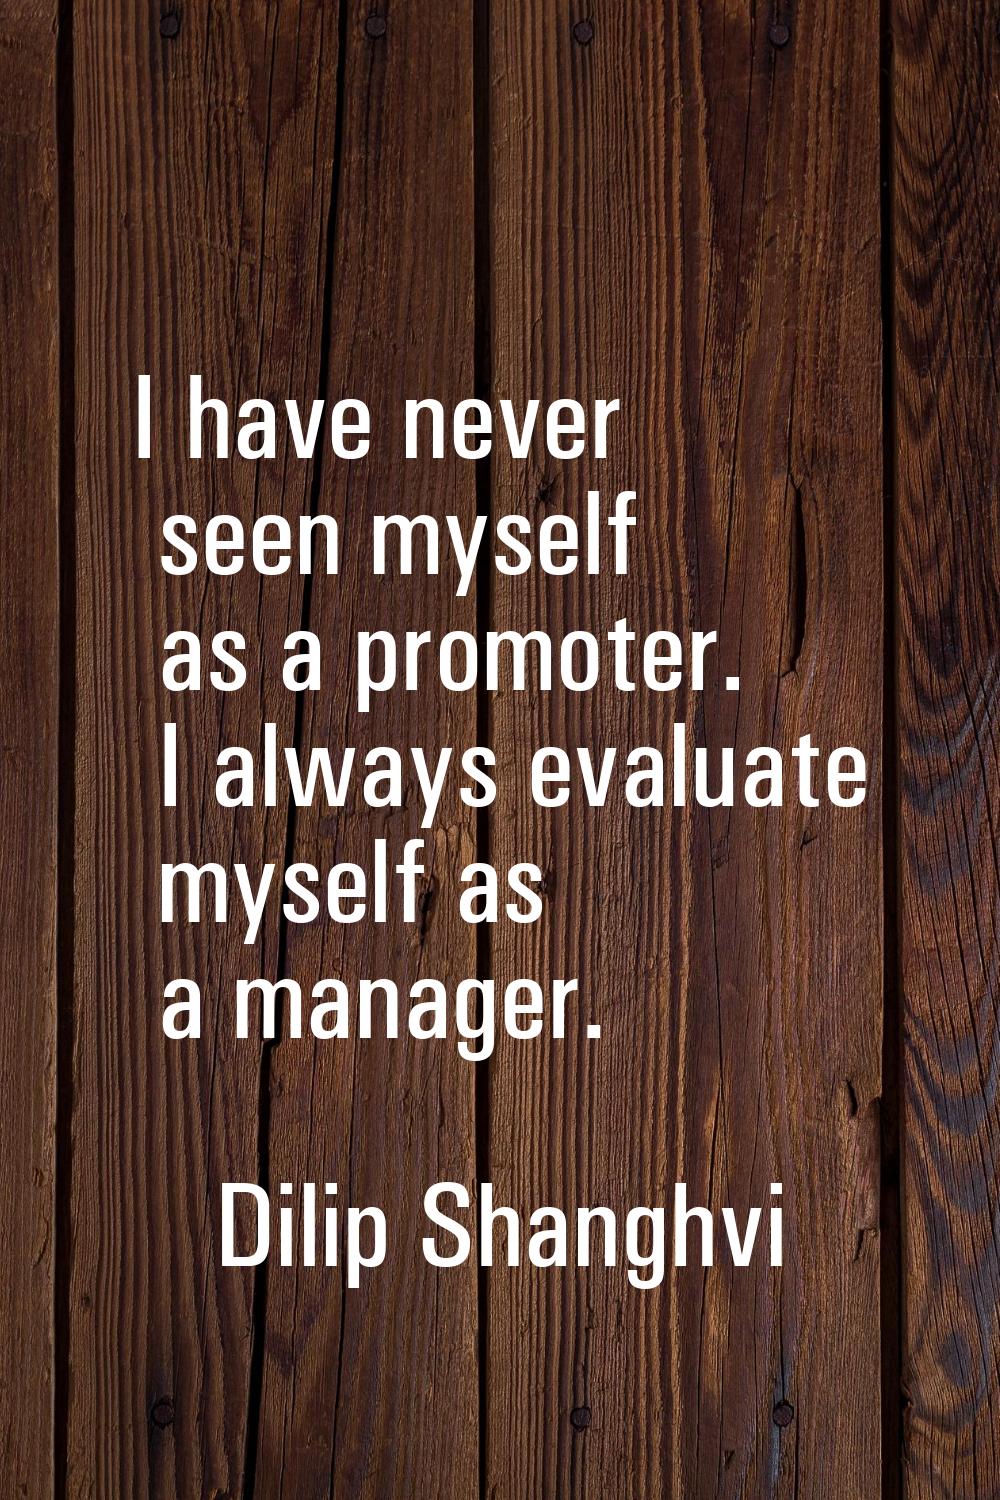 I have never seen myself as a promoter. I always evaluate myself as a manager.